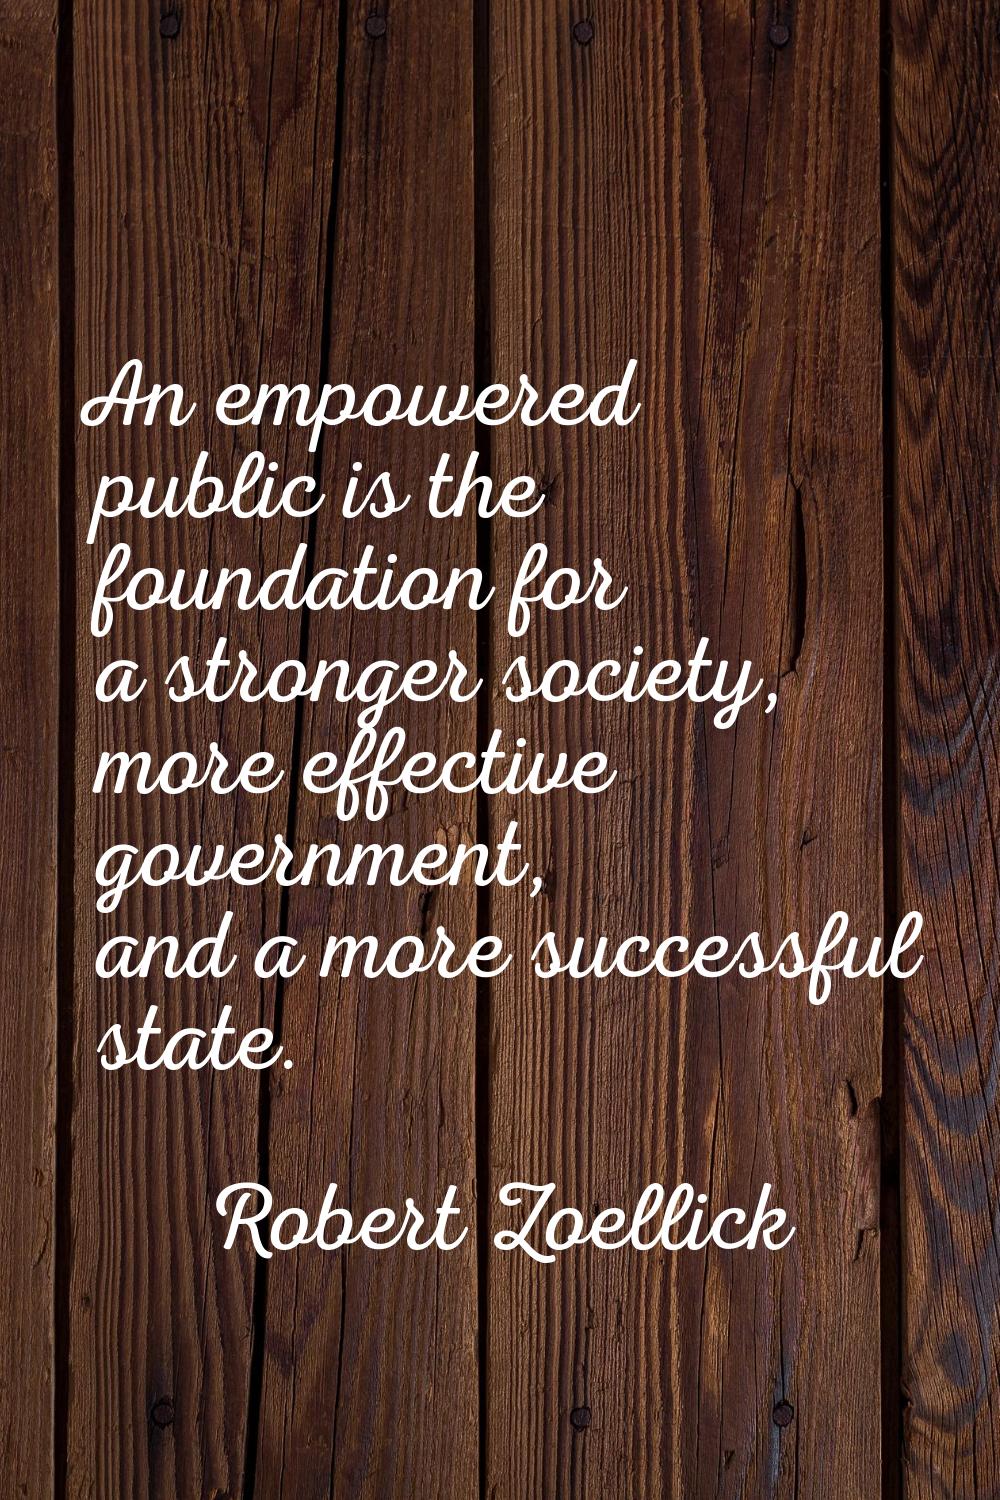 An empowered public is the foundation for a stronger society, more effective government, and a more